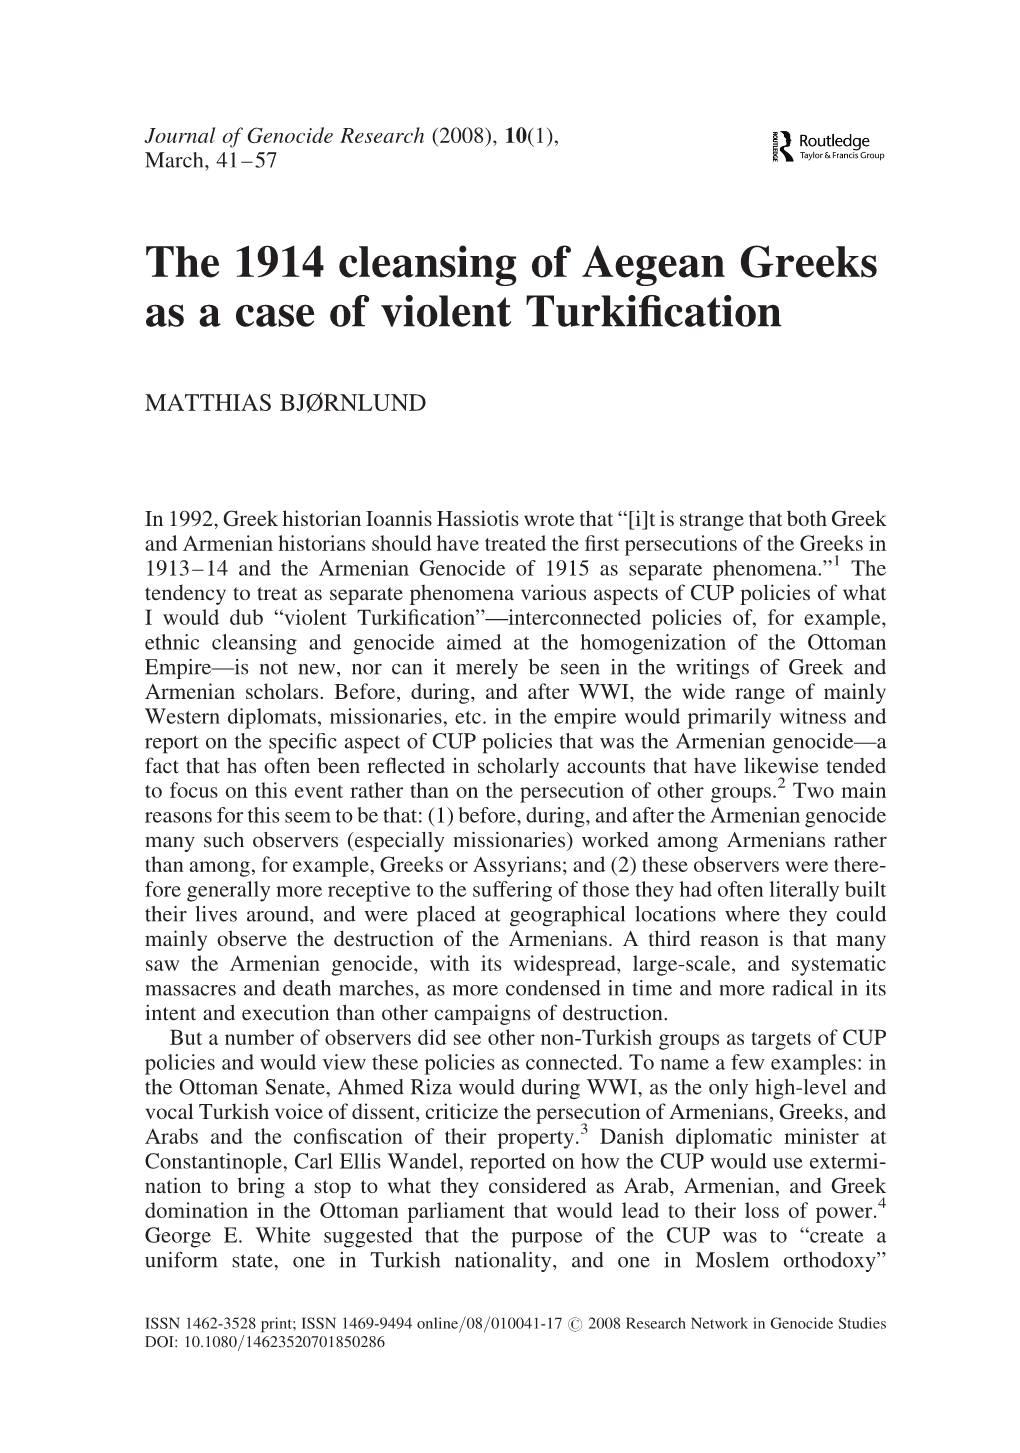 The 1914 Cleansing of Aegean Greeks As a Case of Violent Turkification